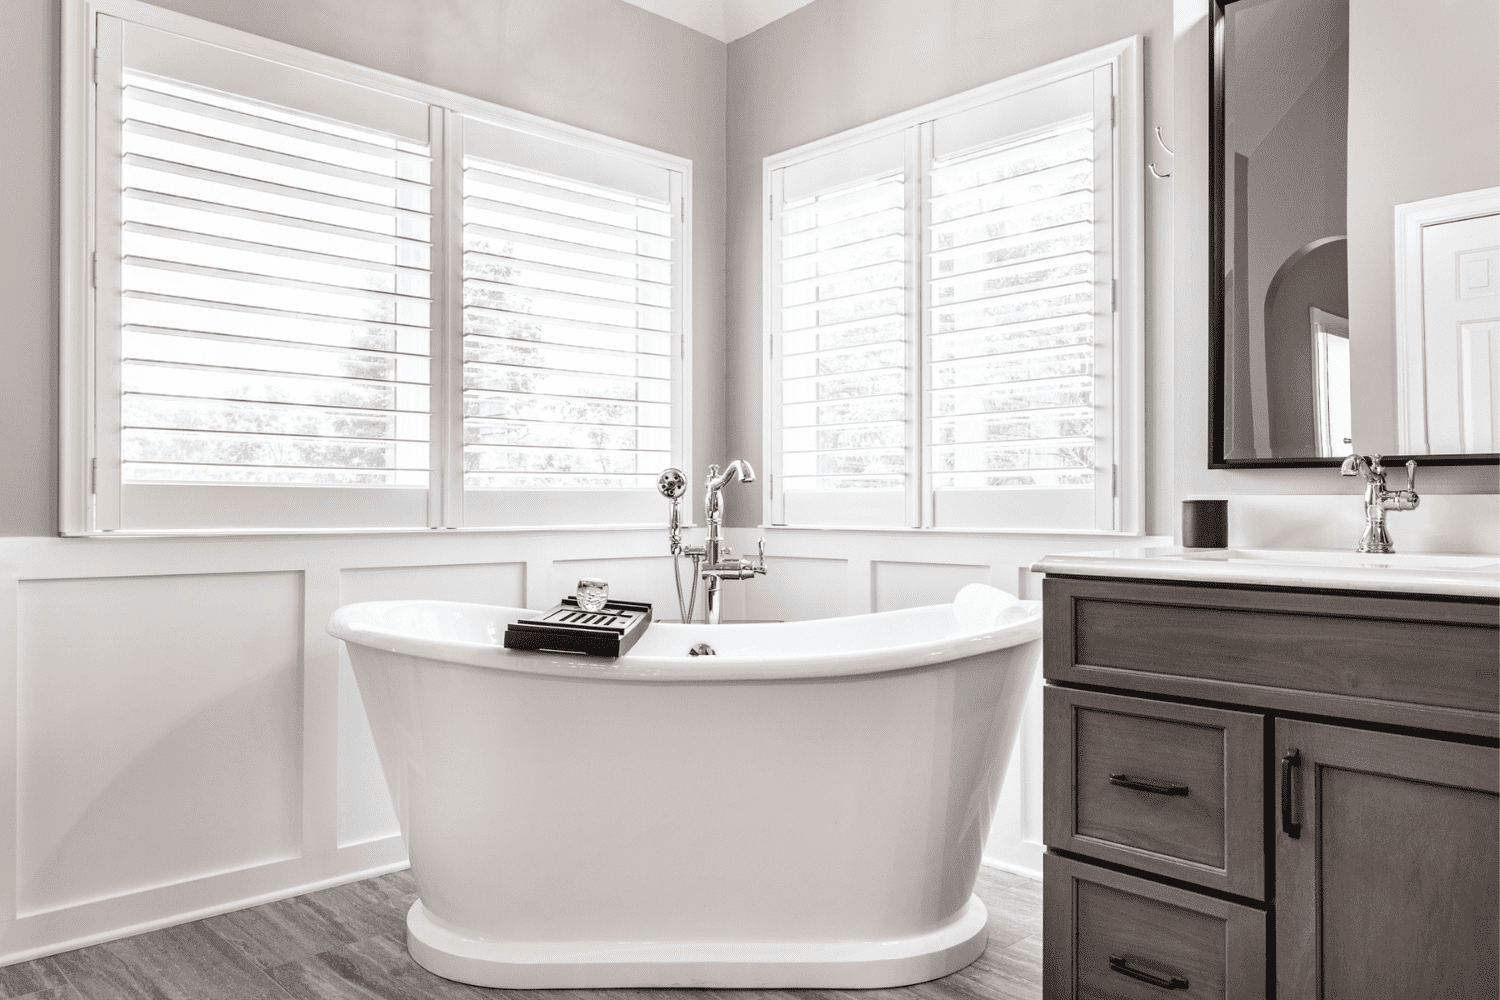 Nicholas Design Build | A master bath remodel featuring a white bathroom with wooden floors and white shutters.